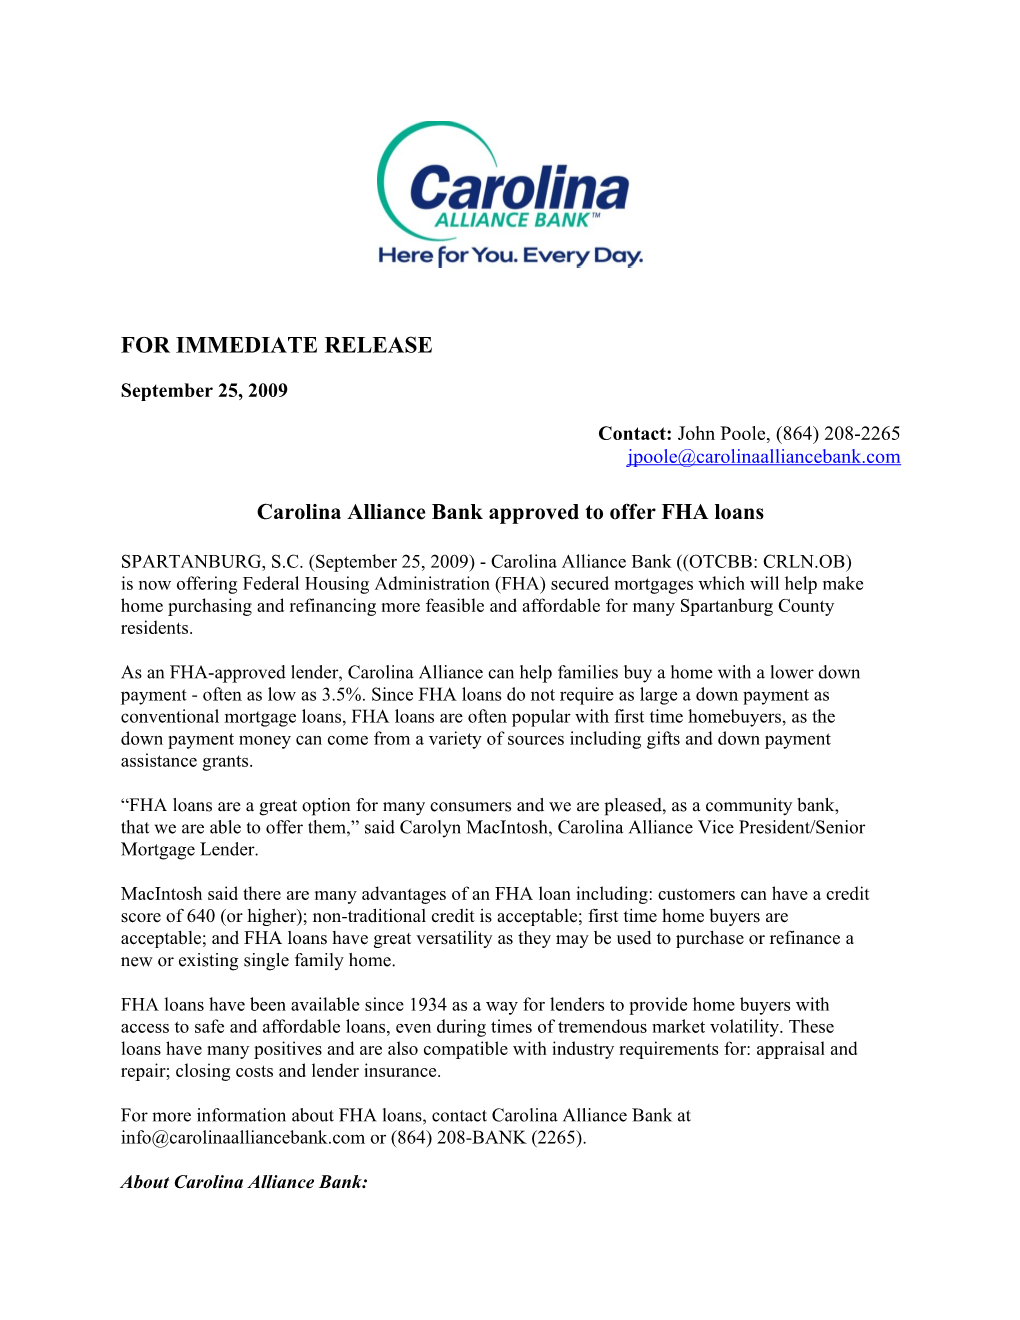 Carolina Alliance Bank Approved to Offer FHA Loans